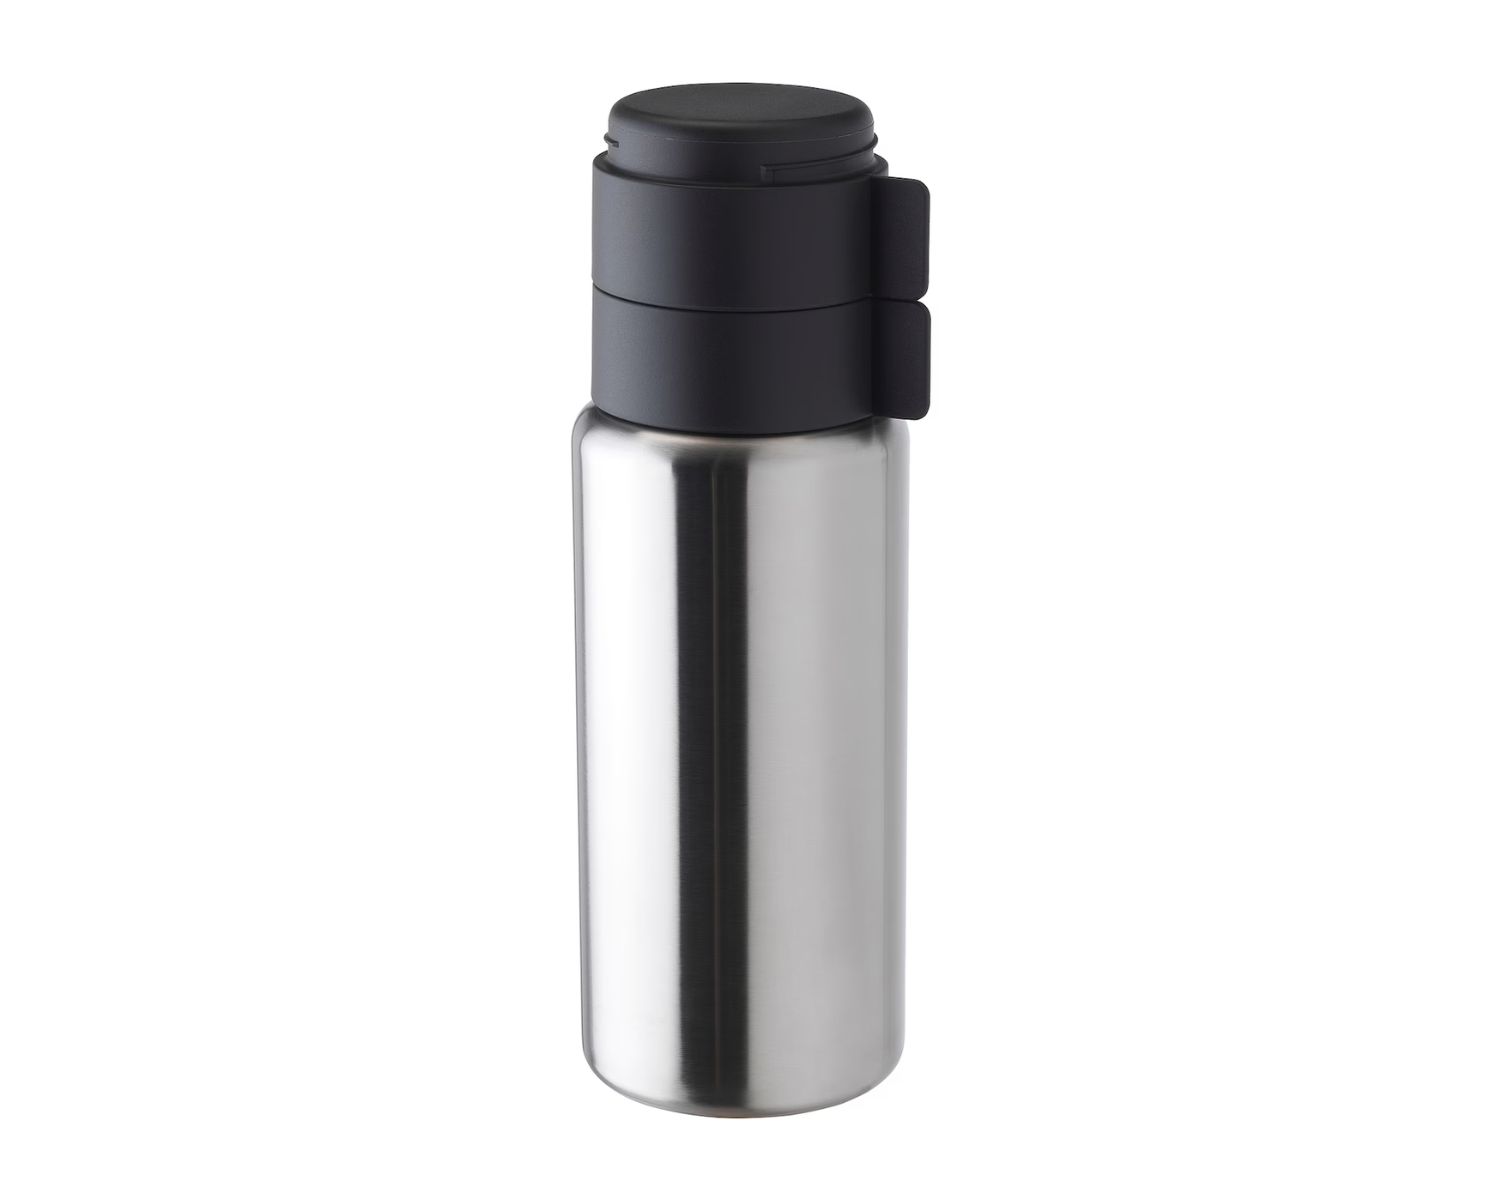 Thermal Flask Review: The Perfect Insulated Drinkware